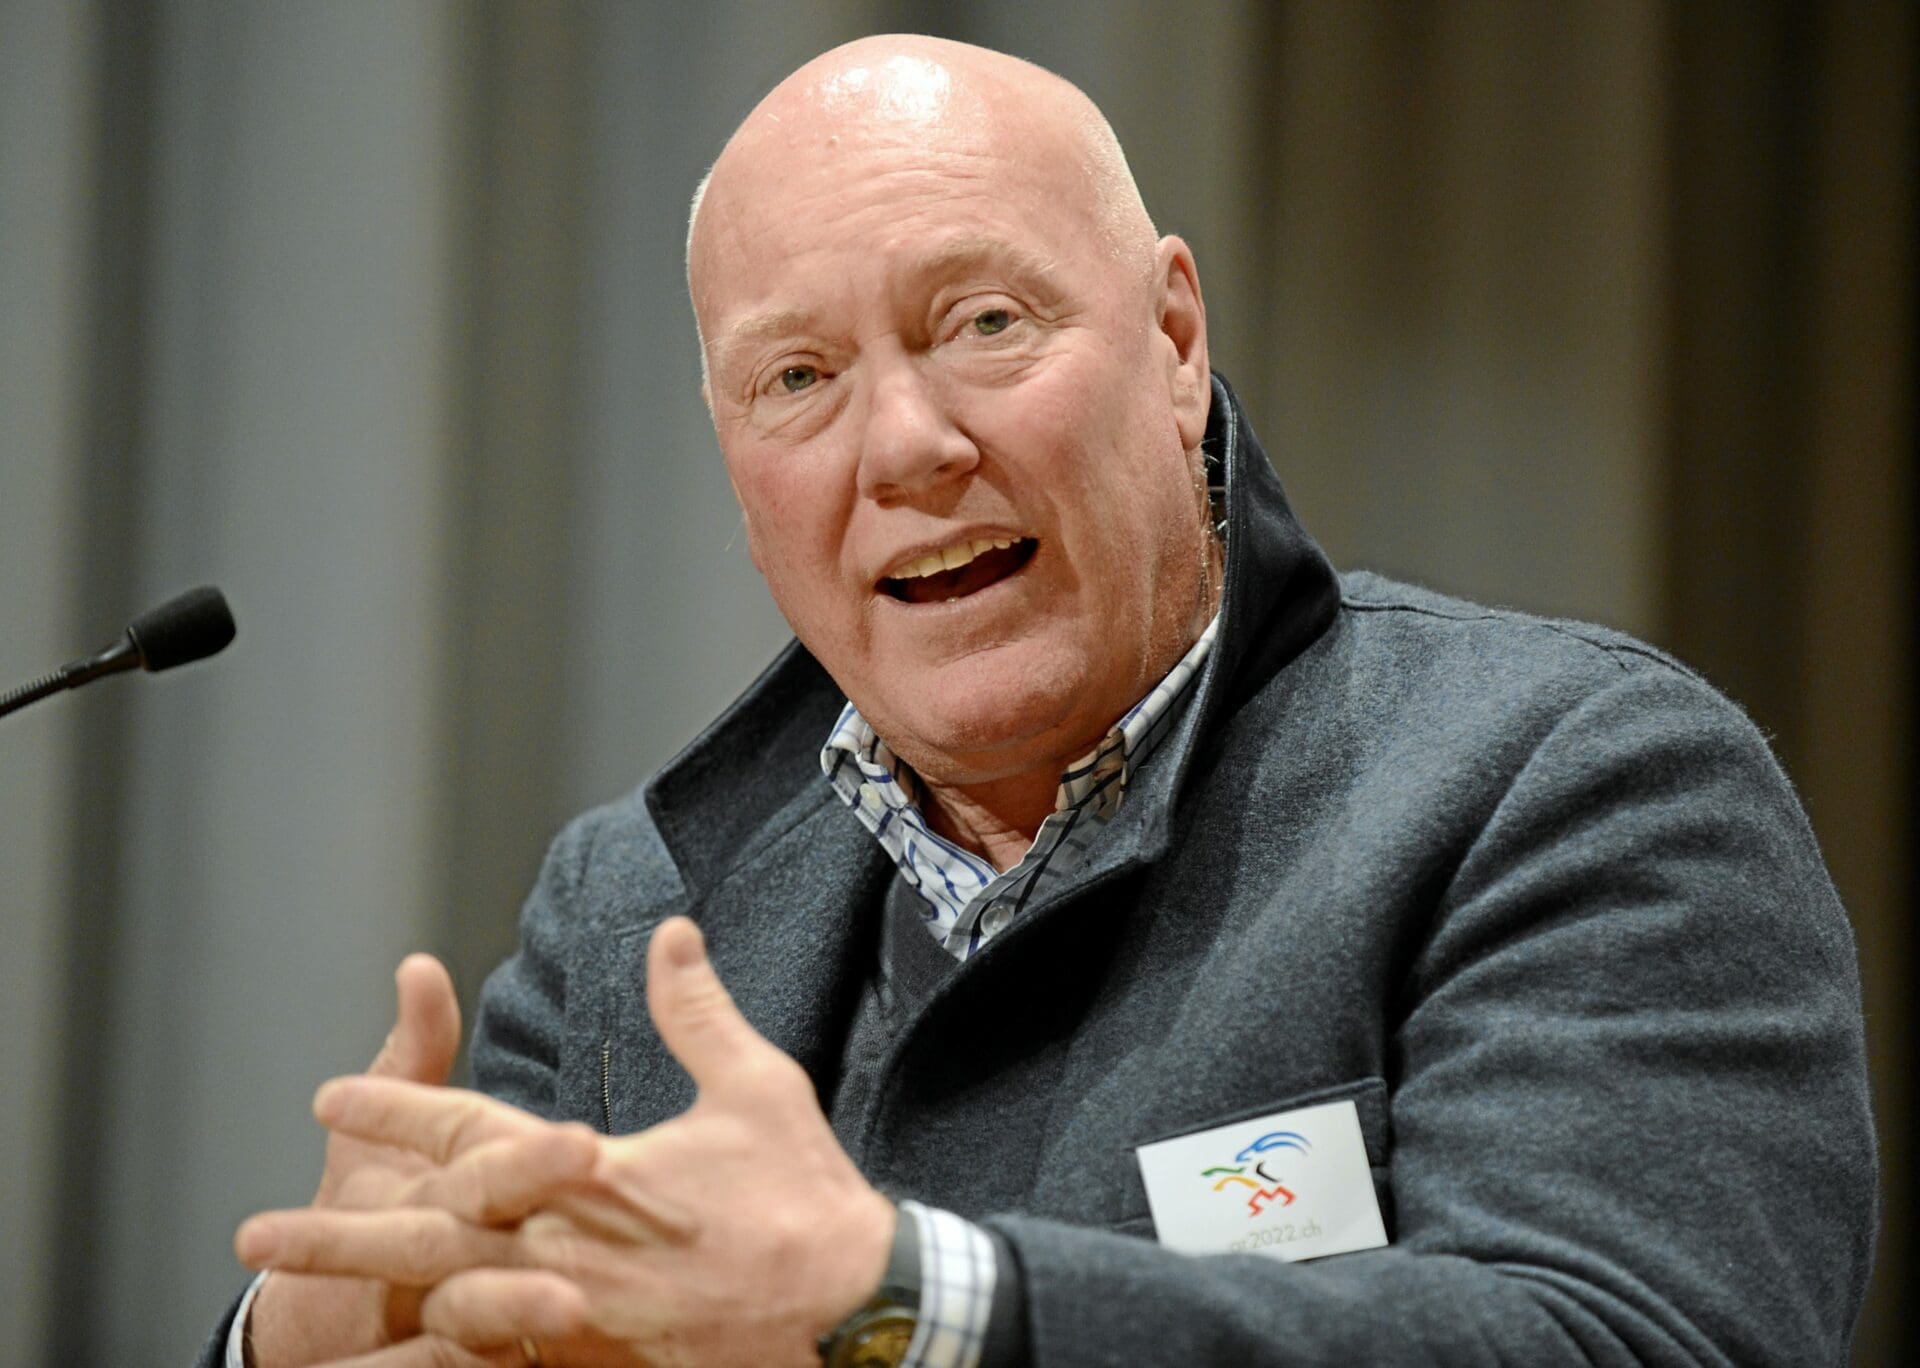 Dinner with Jean-Claude Biver of TAG Heuer - Banks Lyon